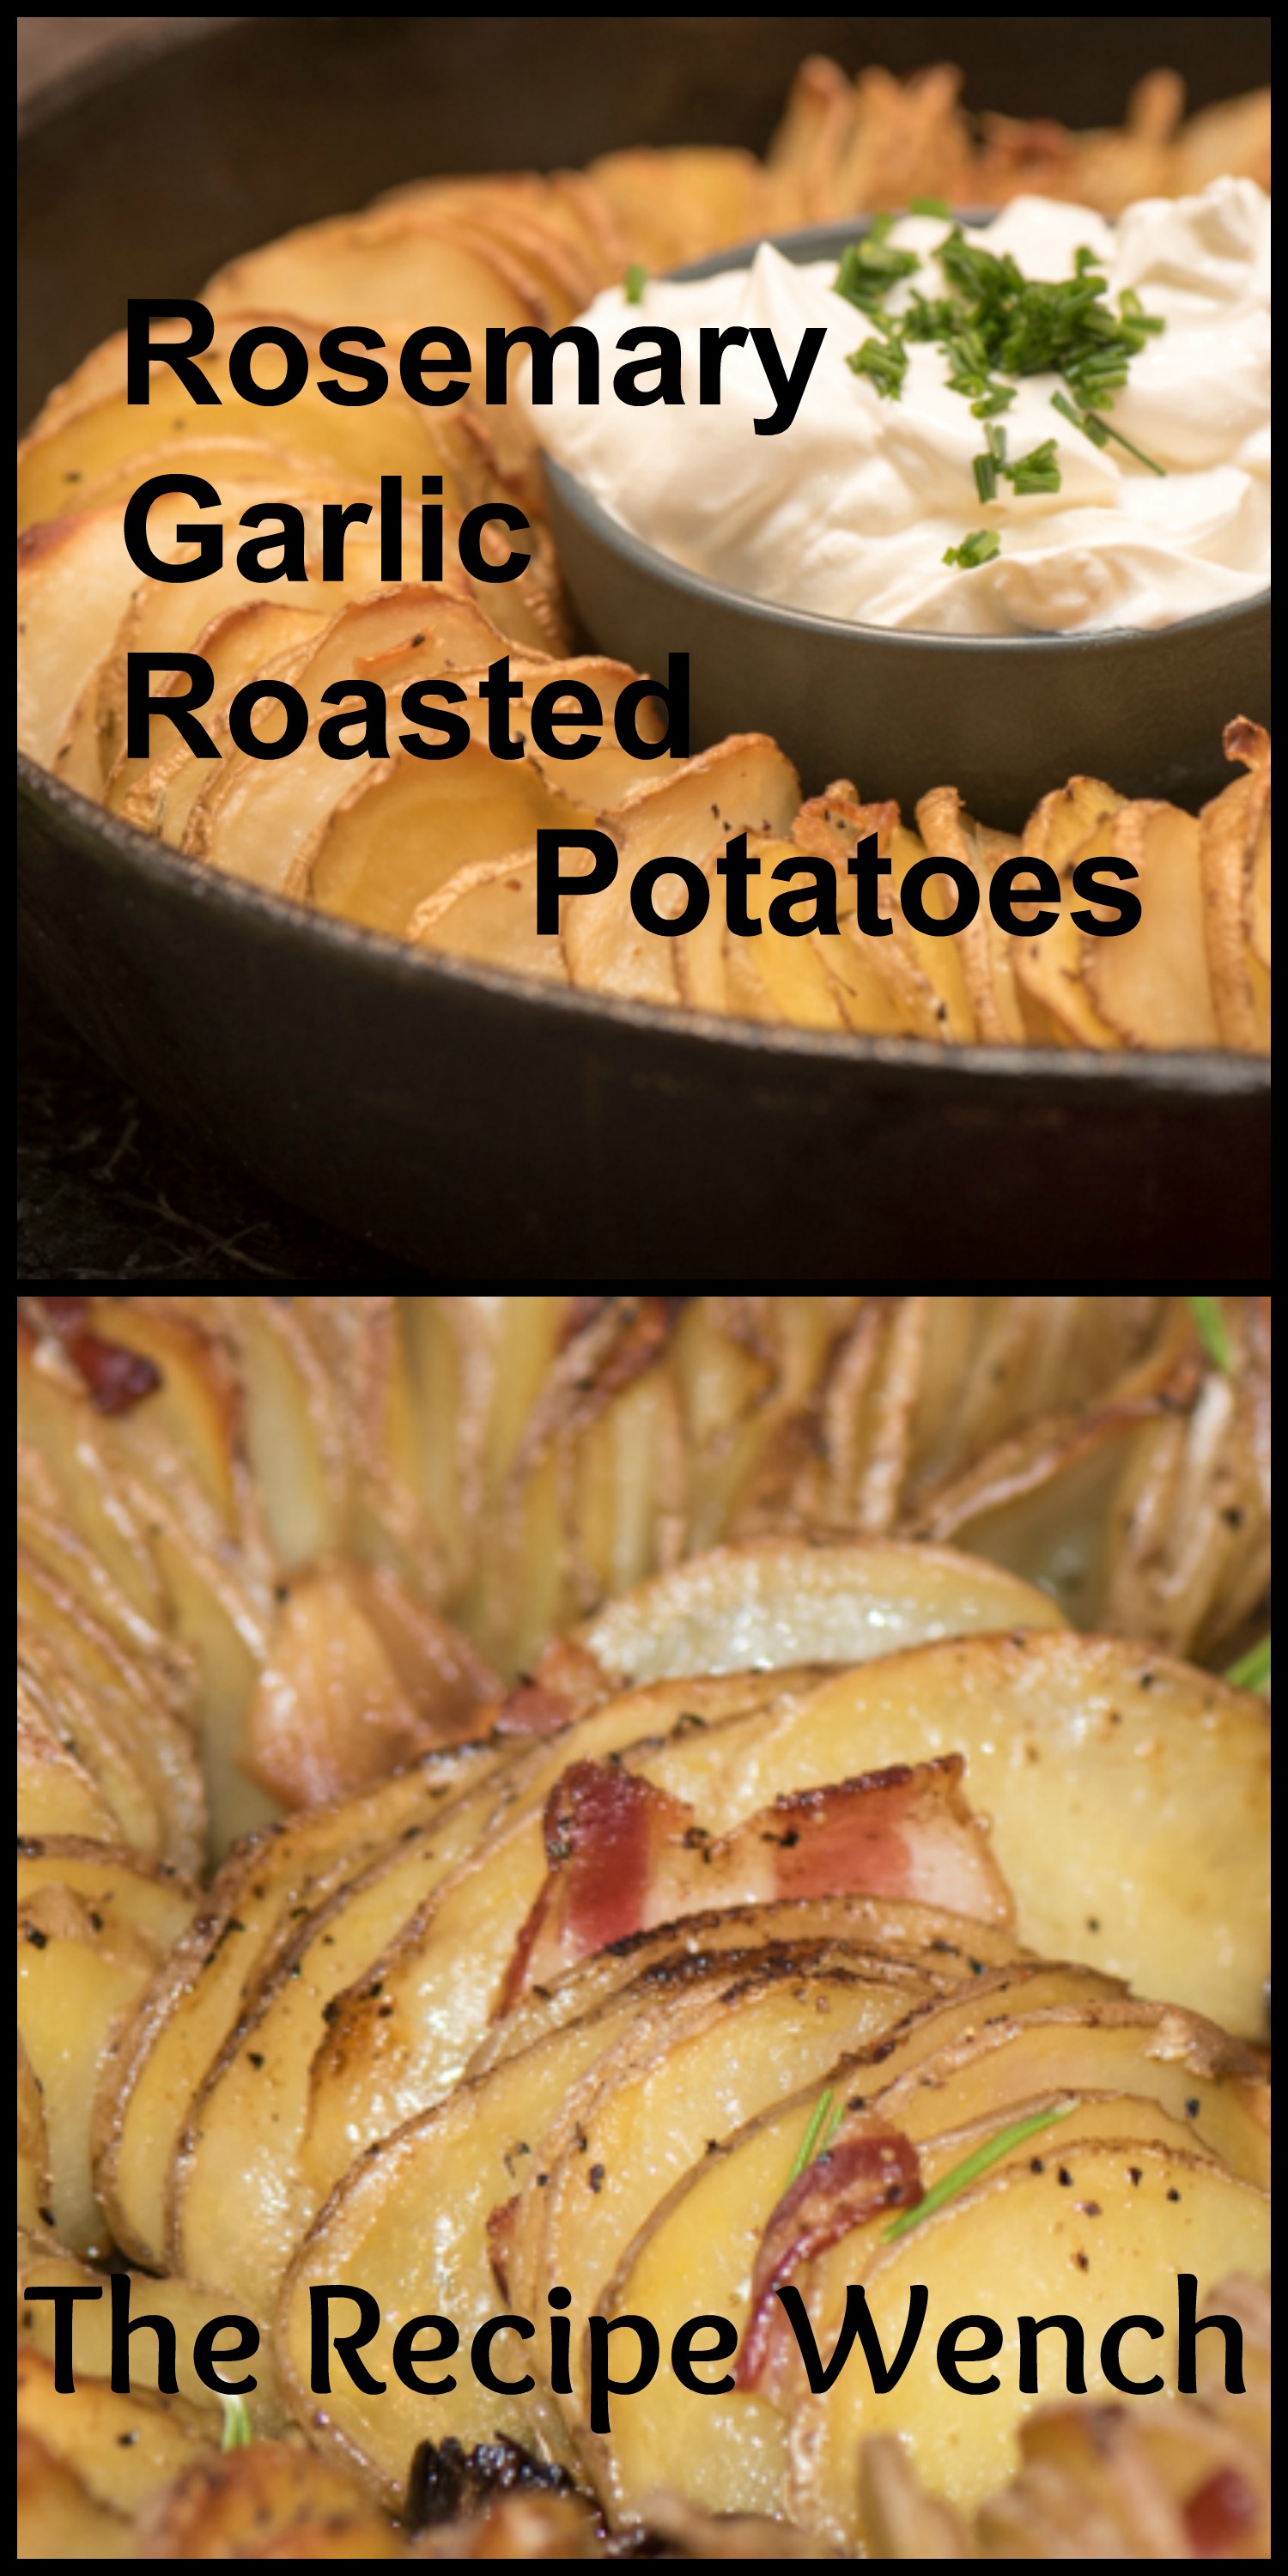 Rosemary garlic roasted potatoes - super tasty and simple. Thinly slice potatoes and layer in ovenproof dish for a pretty presentation. Top with sour cream | The Recipe Wench